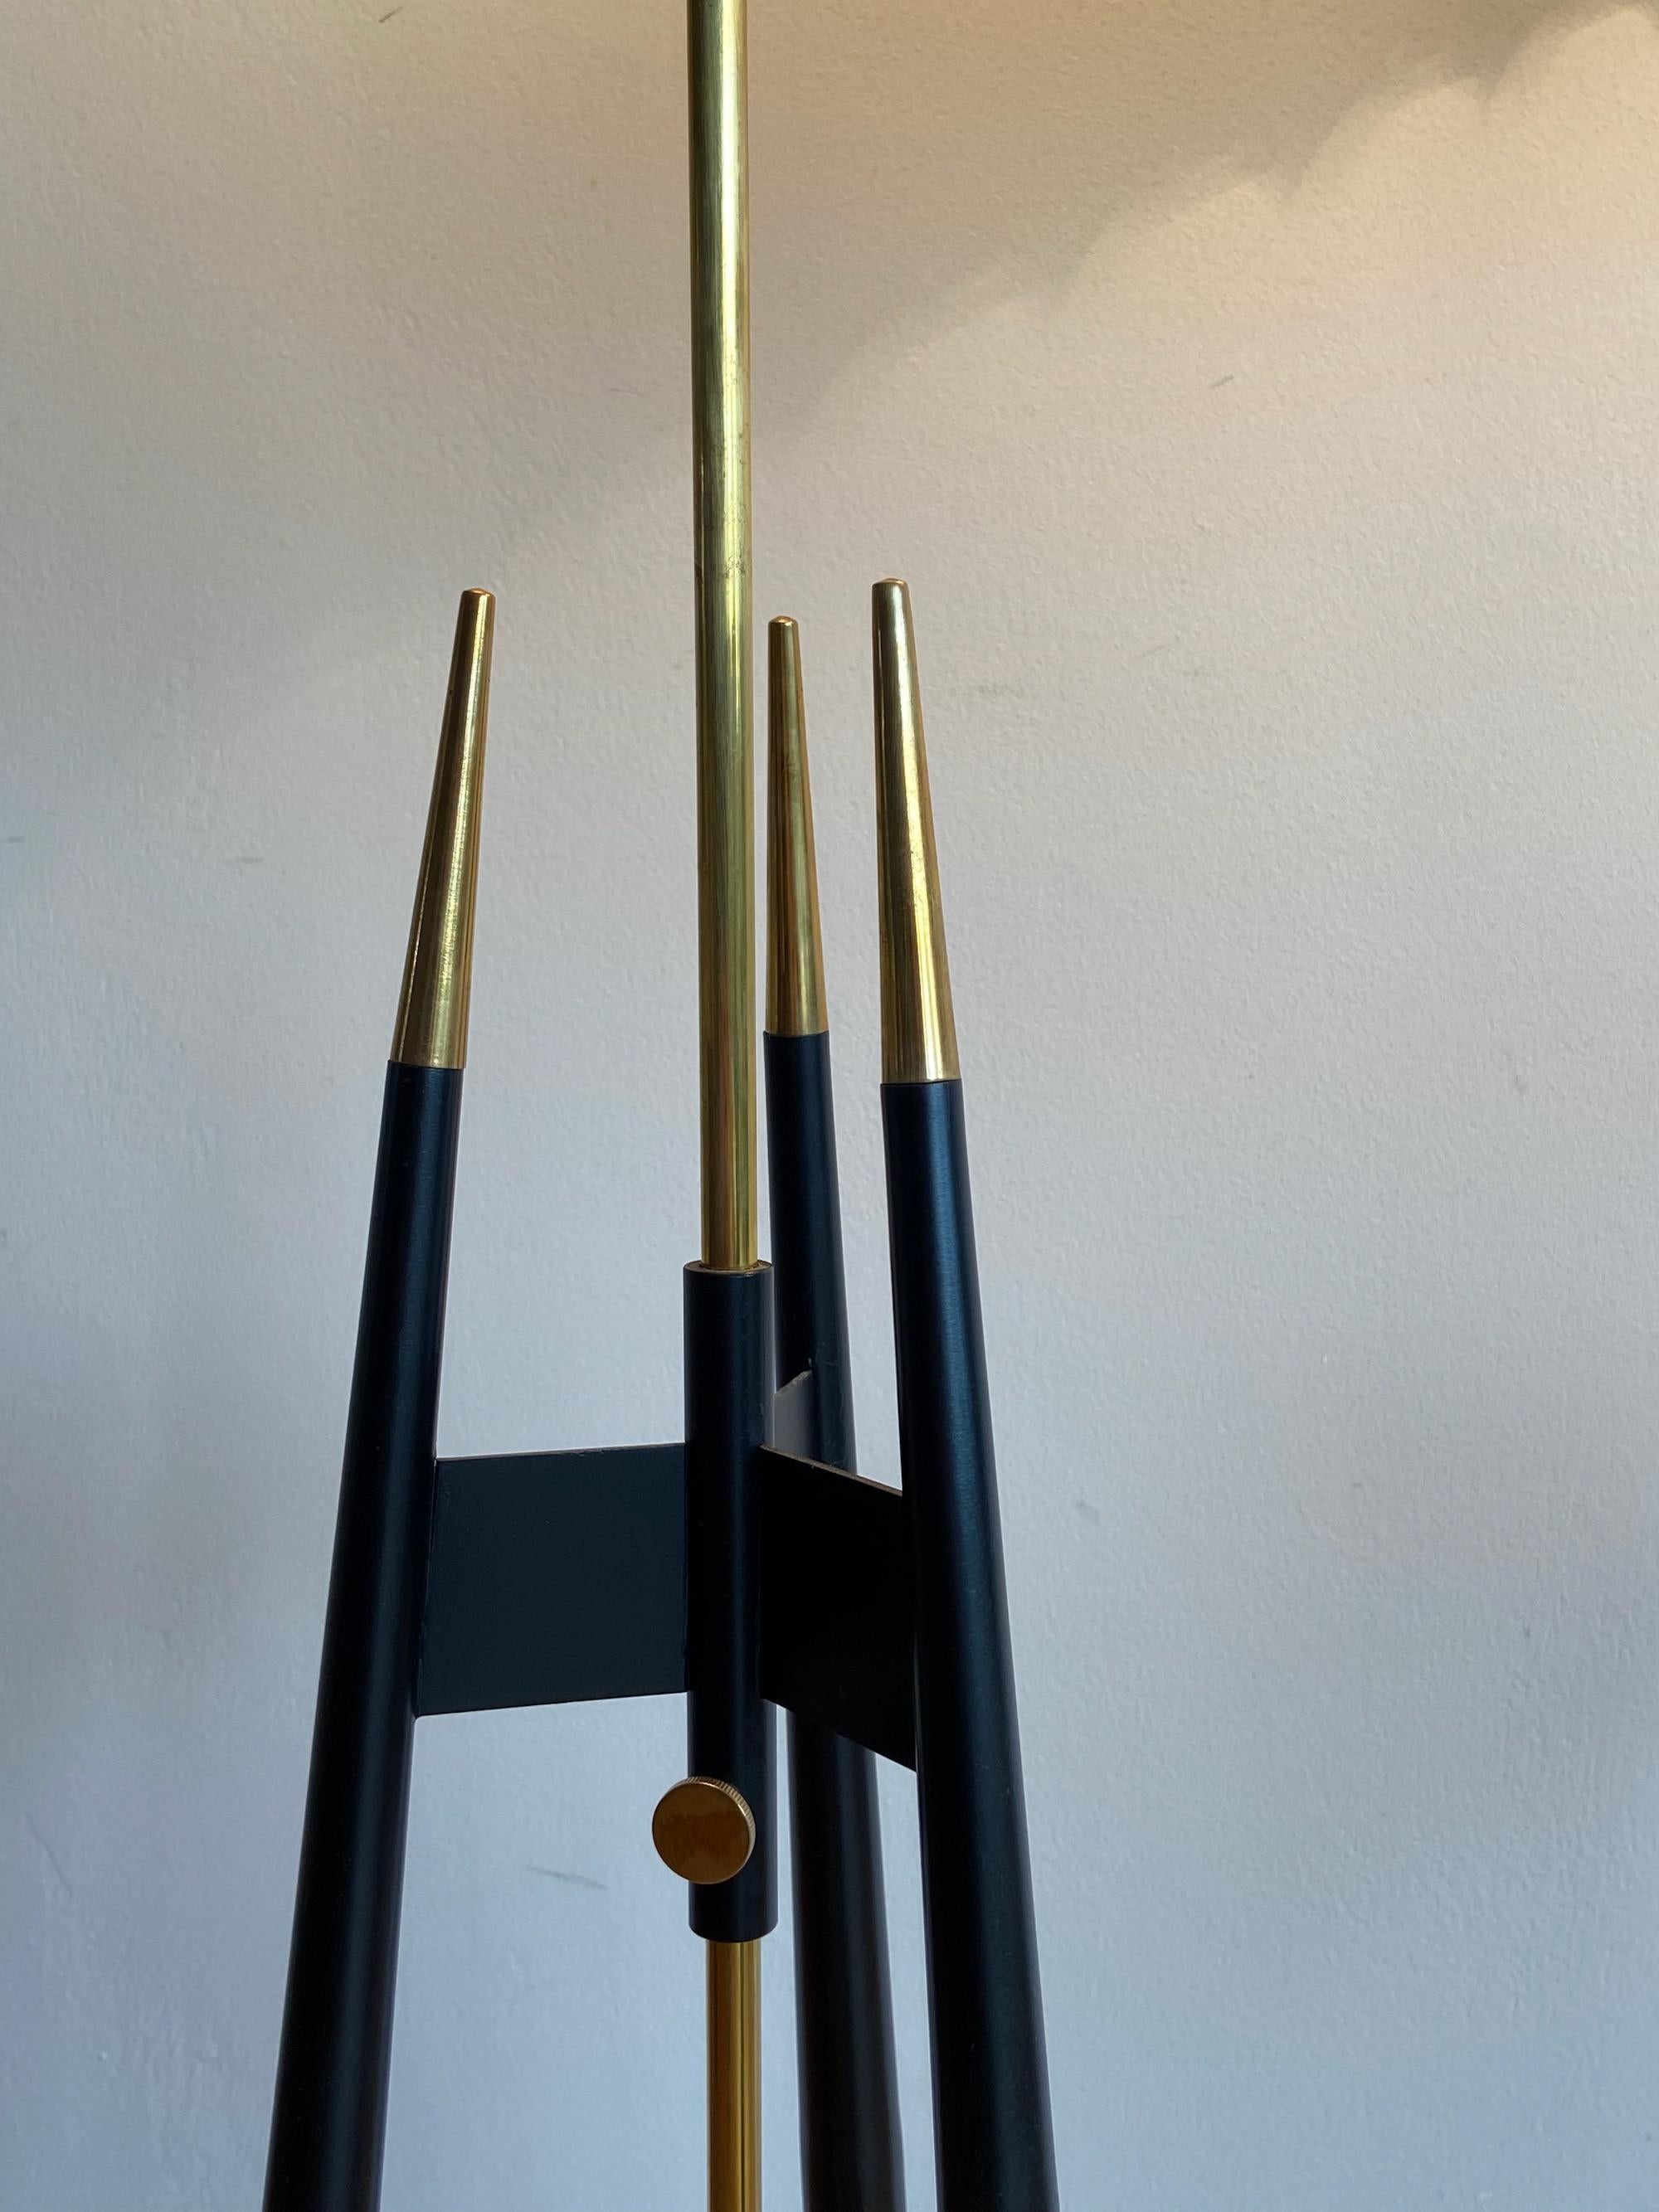 Mid-20th Century Floor Lamps by Svend Aage Holm Sørensen 1950s Made in Denmark